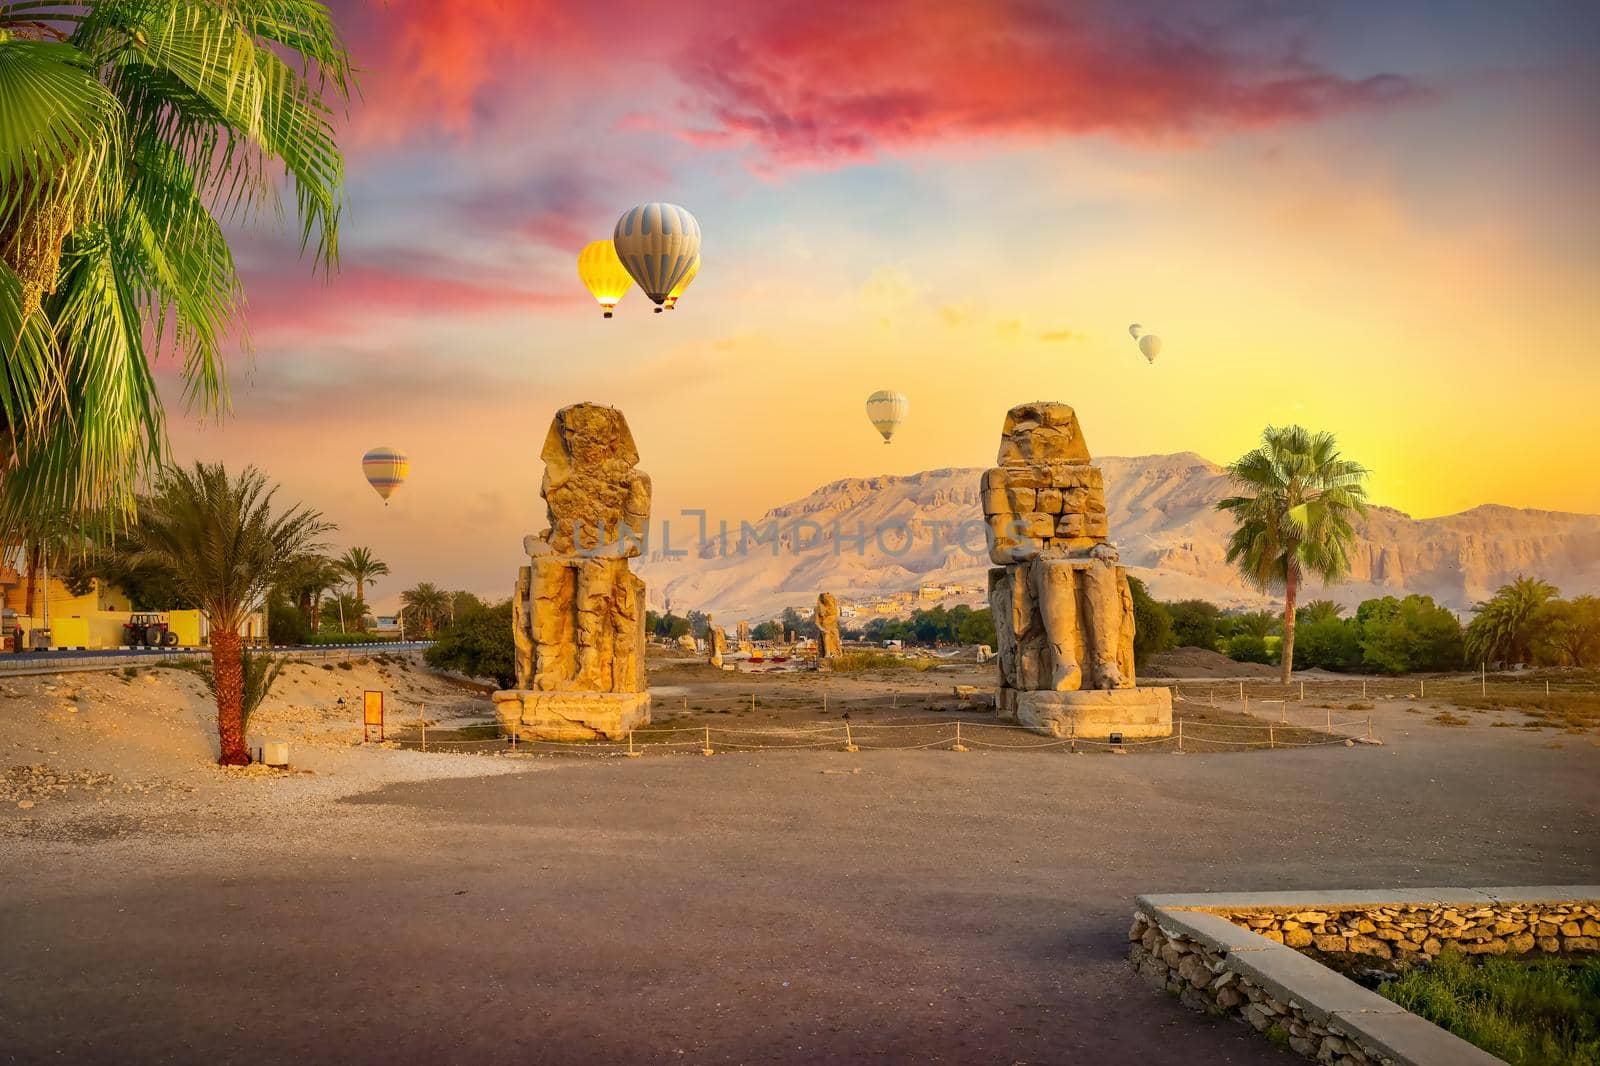 Colossi of Memnon and balloons by Givaga